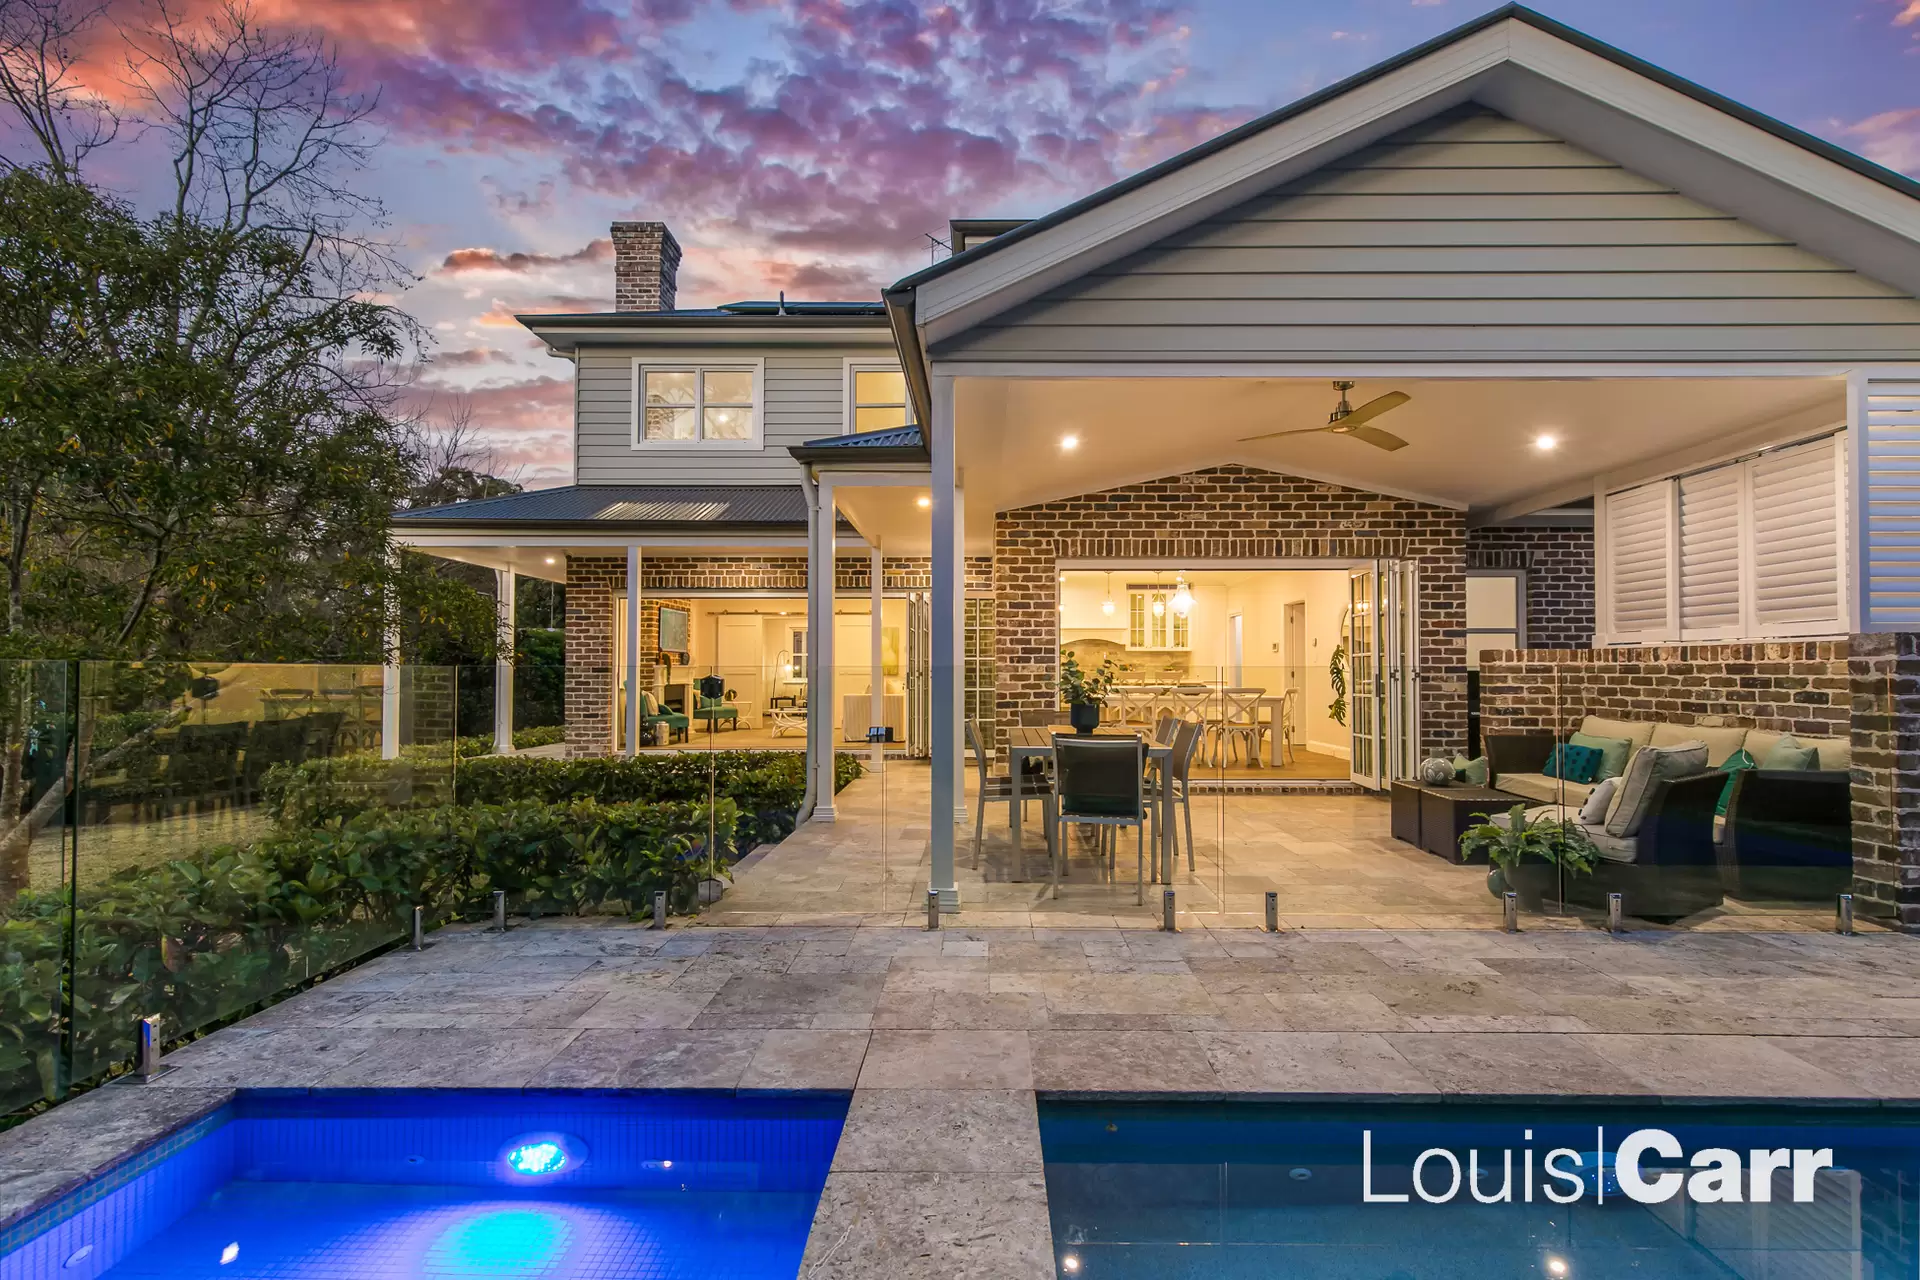 Photo #1: 59 Loftus Road, Pennant Hills - Auction by Louis Carr Real Estate